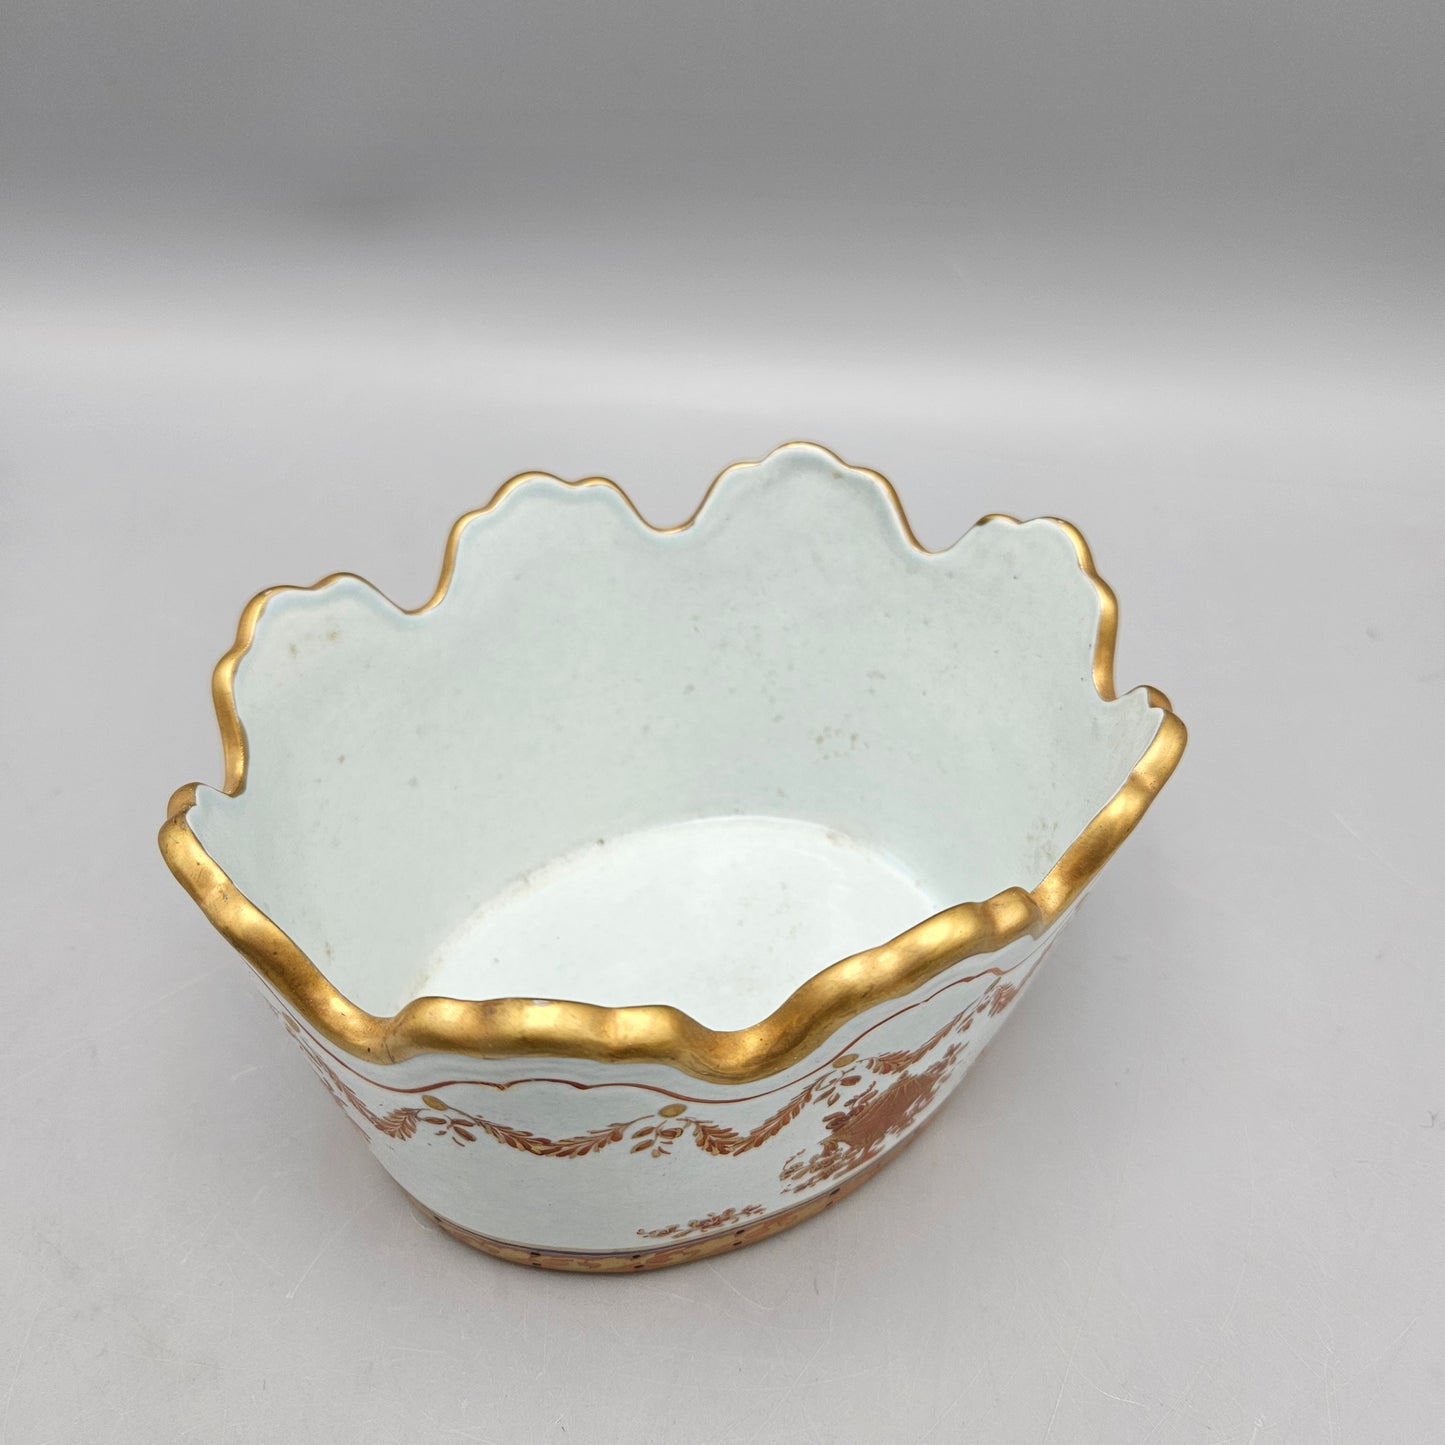 Mottahedeh Lowestoft Monteith Porcelain Scalloped Candy Nut Bowl Cachepot